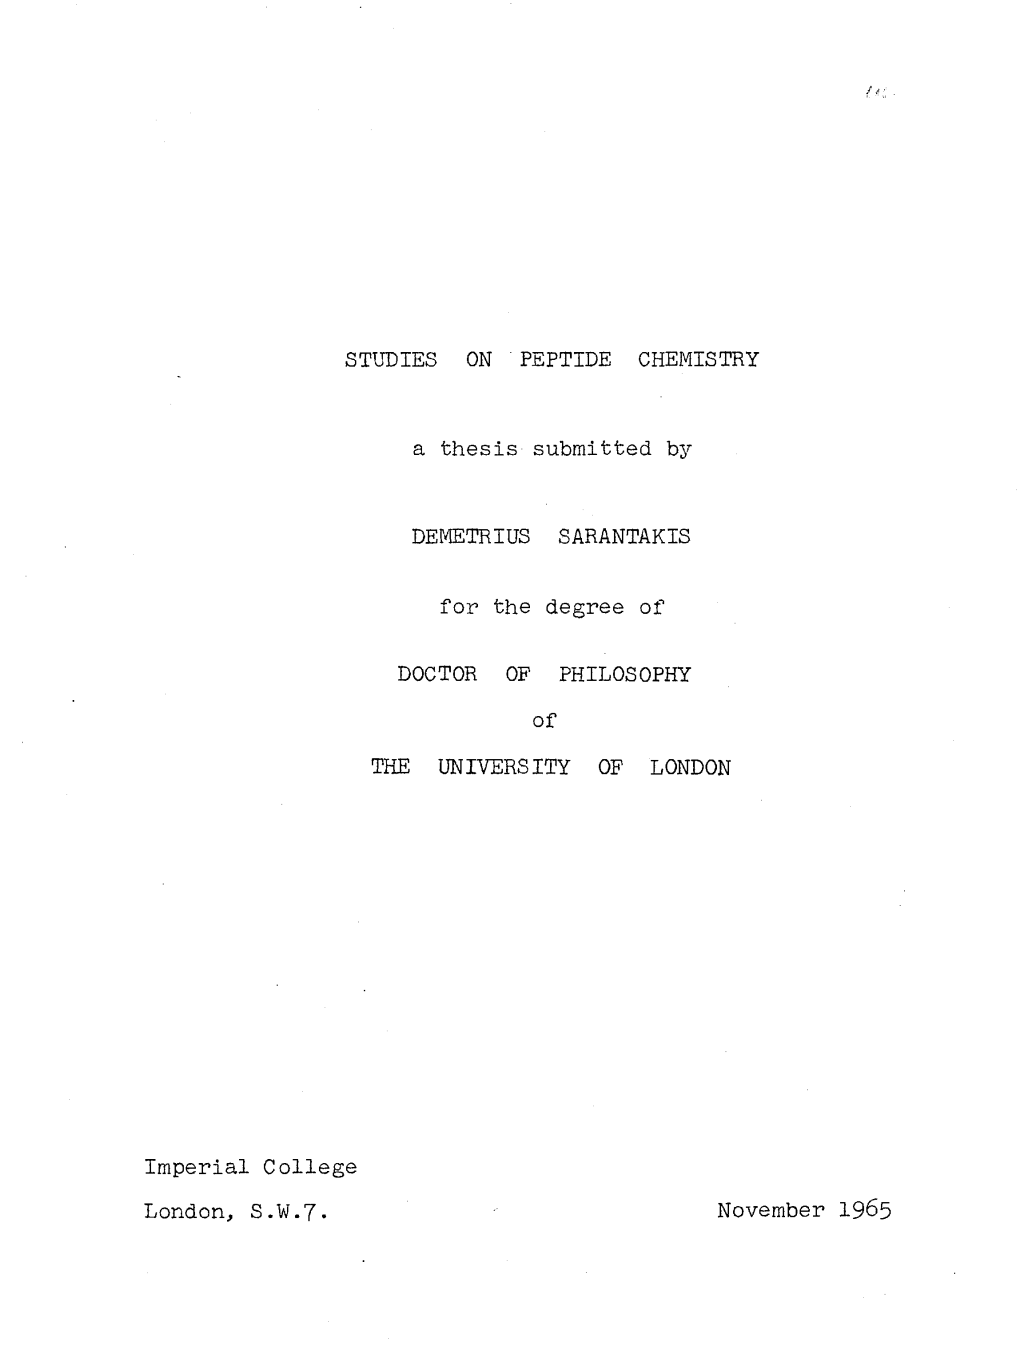 STUDIES on PEPTIDE CHEMISTRY a Thesis Submitted by DEMETRIUS SARANTAKIS for the Degree of DOCTOR of PHILOSOPHY of Imperial Colle